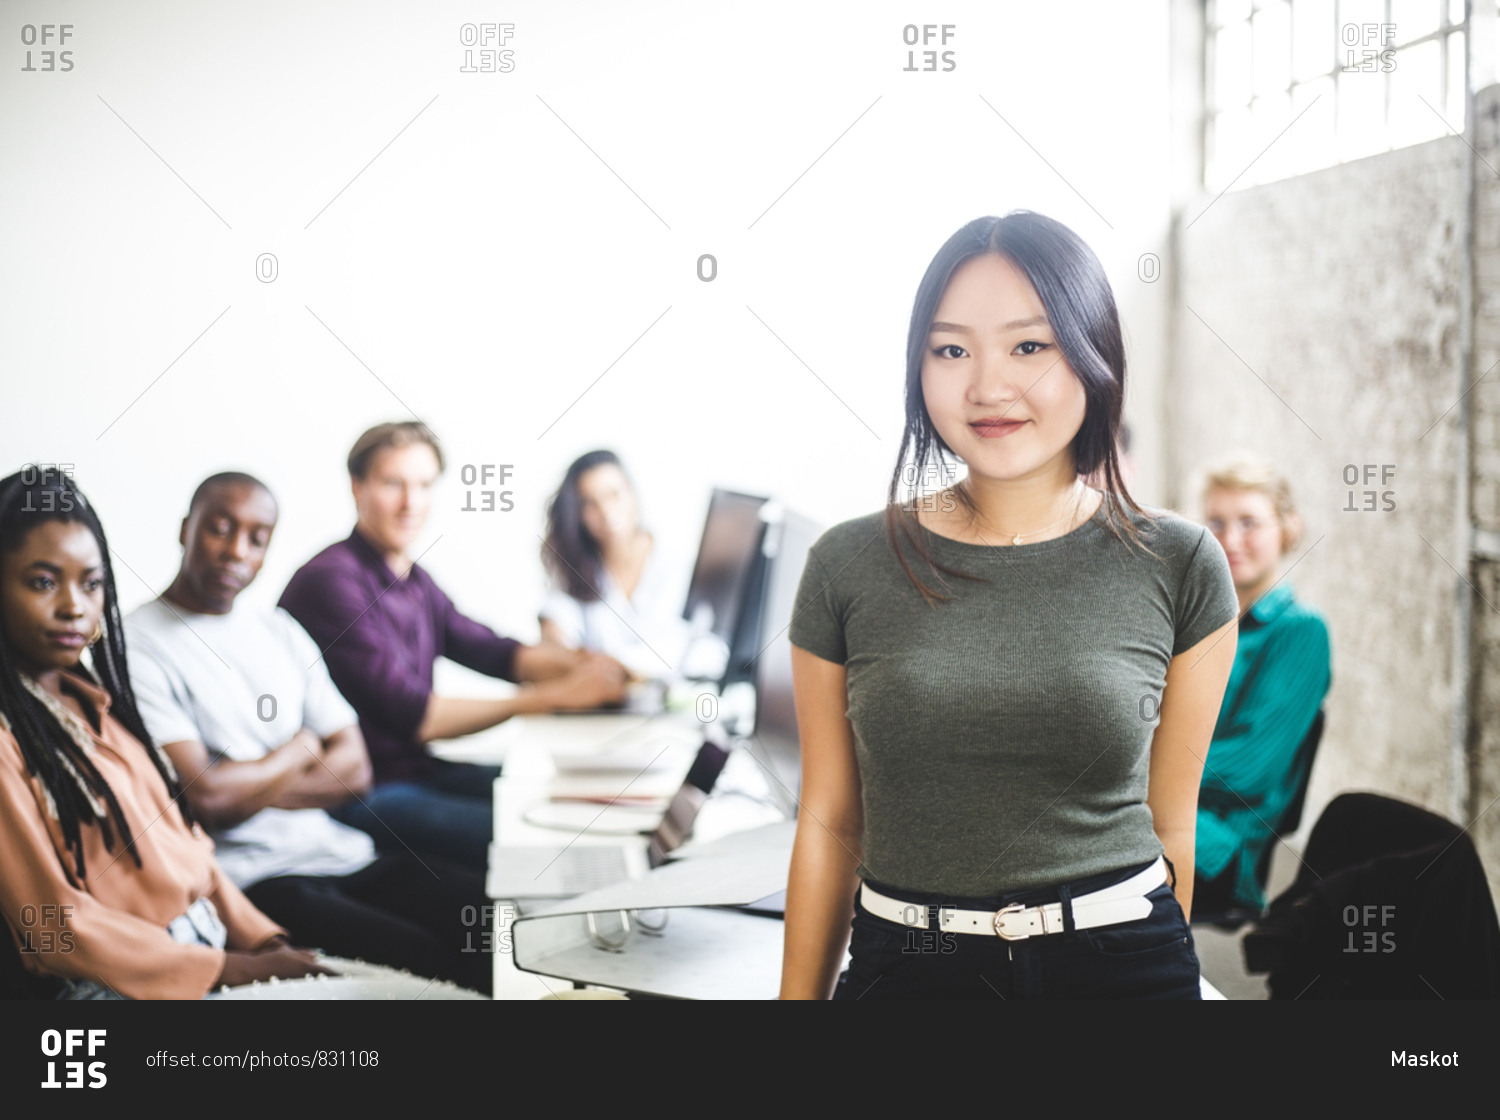 Portrait of smiling female IT expert with coworkers in background at workplace